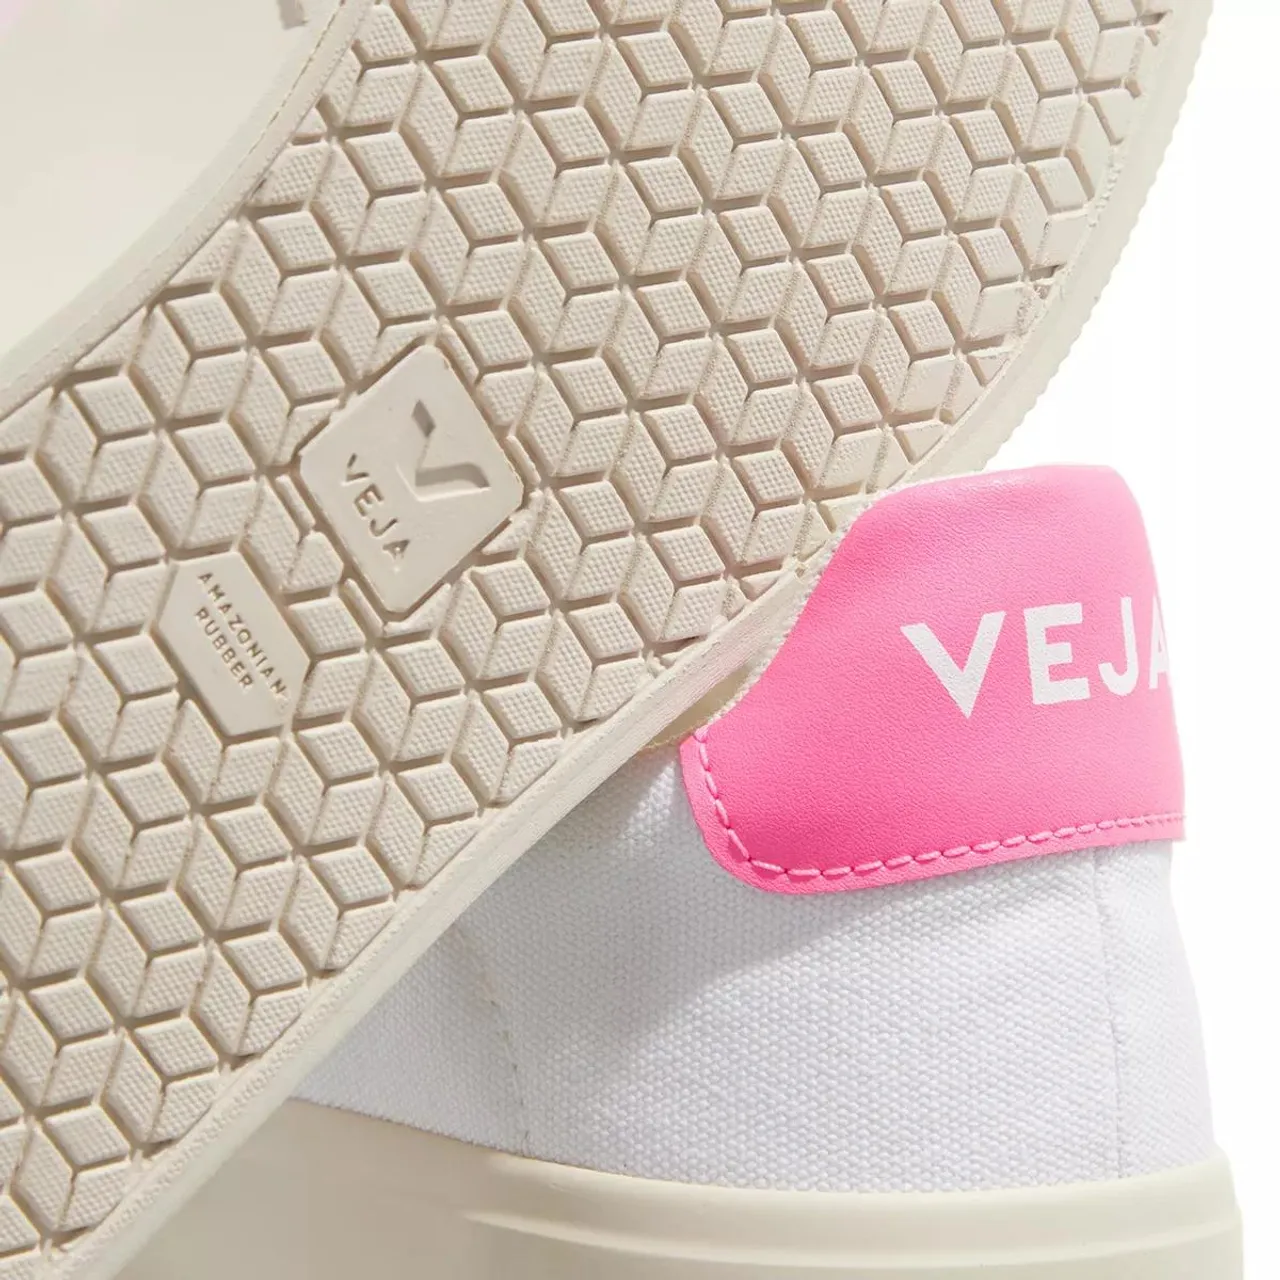 Veja Sneakers - Campo Ca - white - Sneakers for ladies